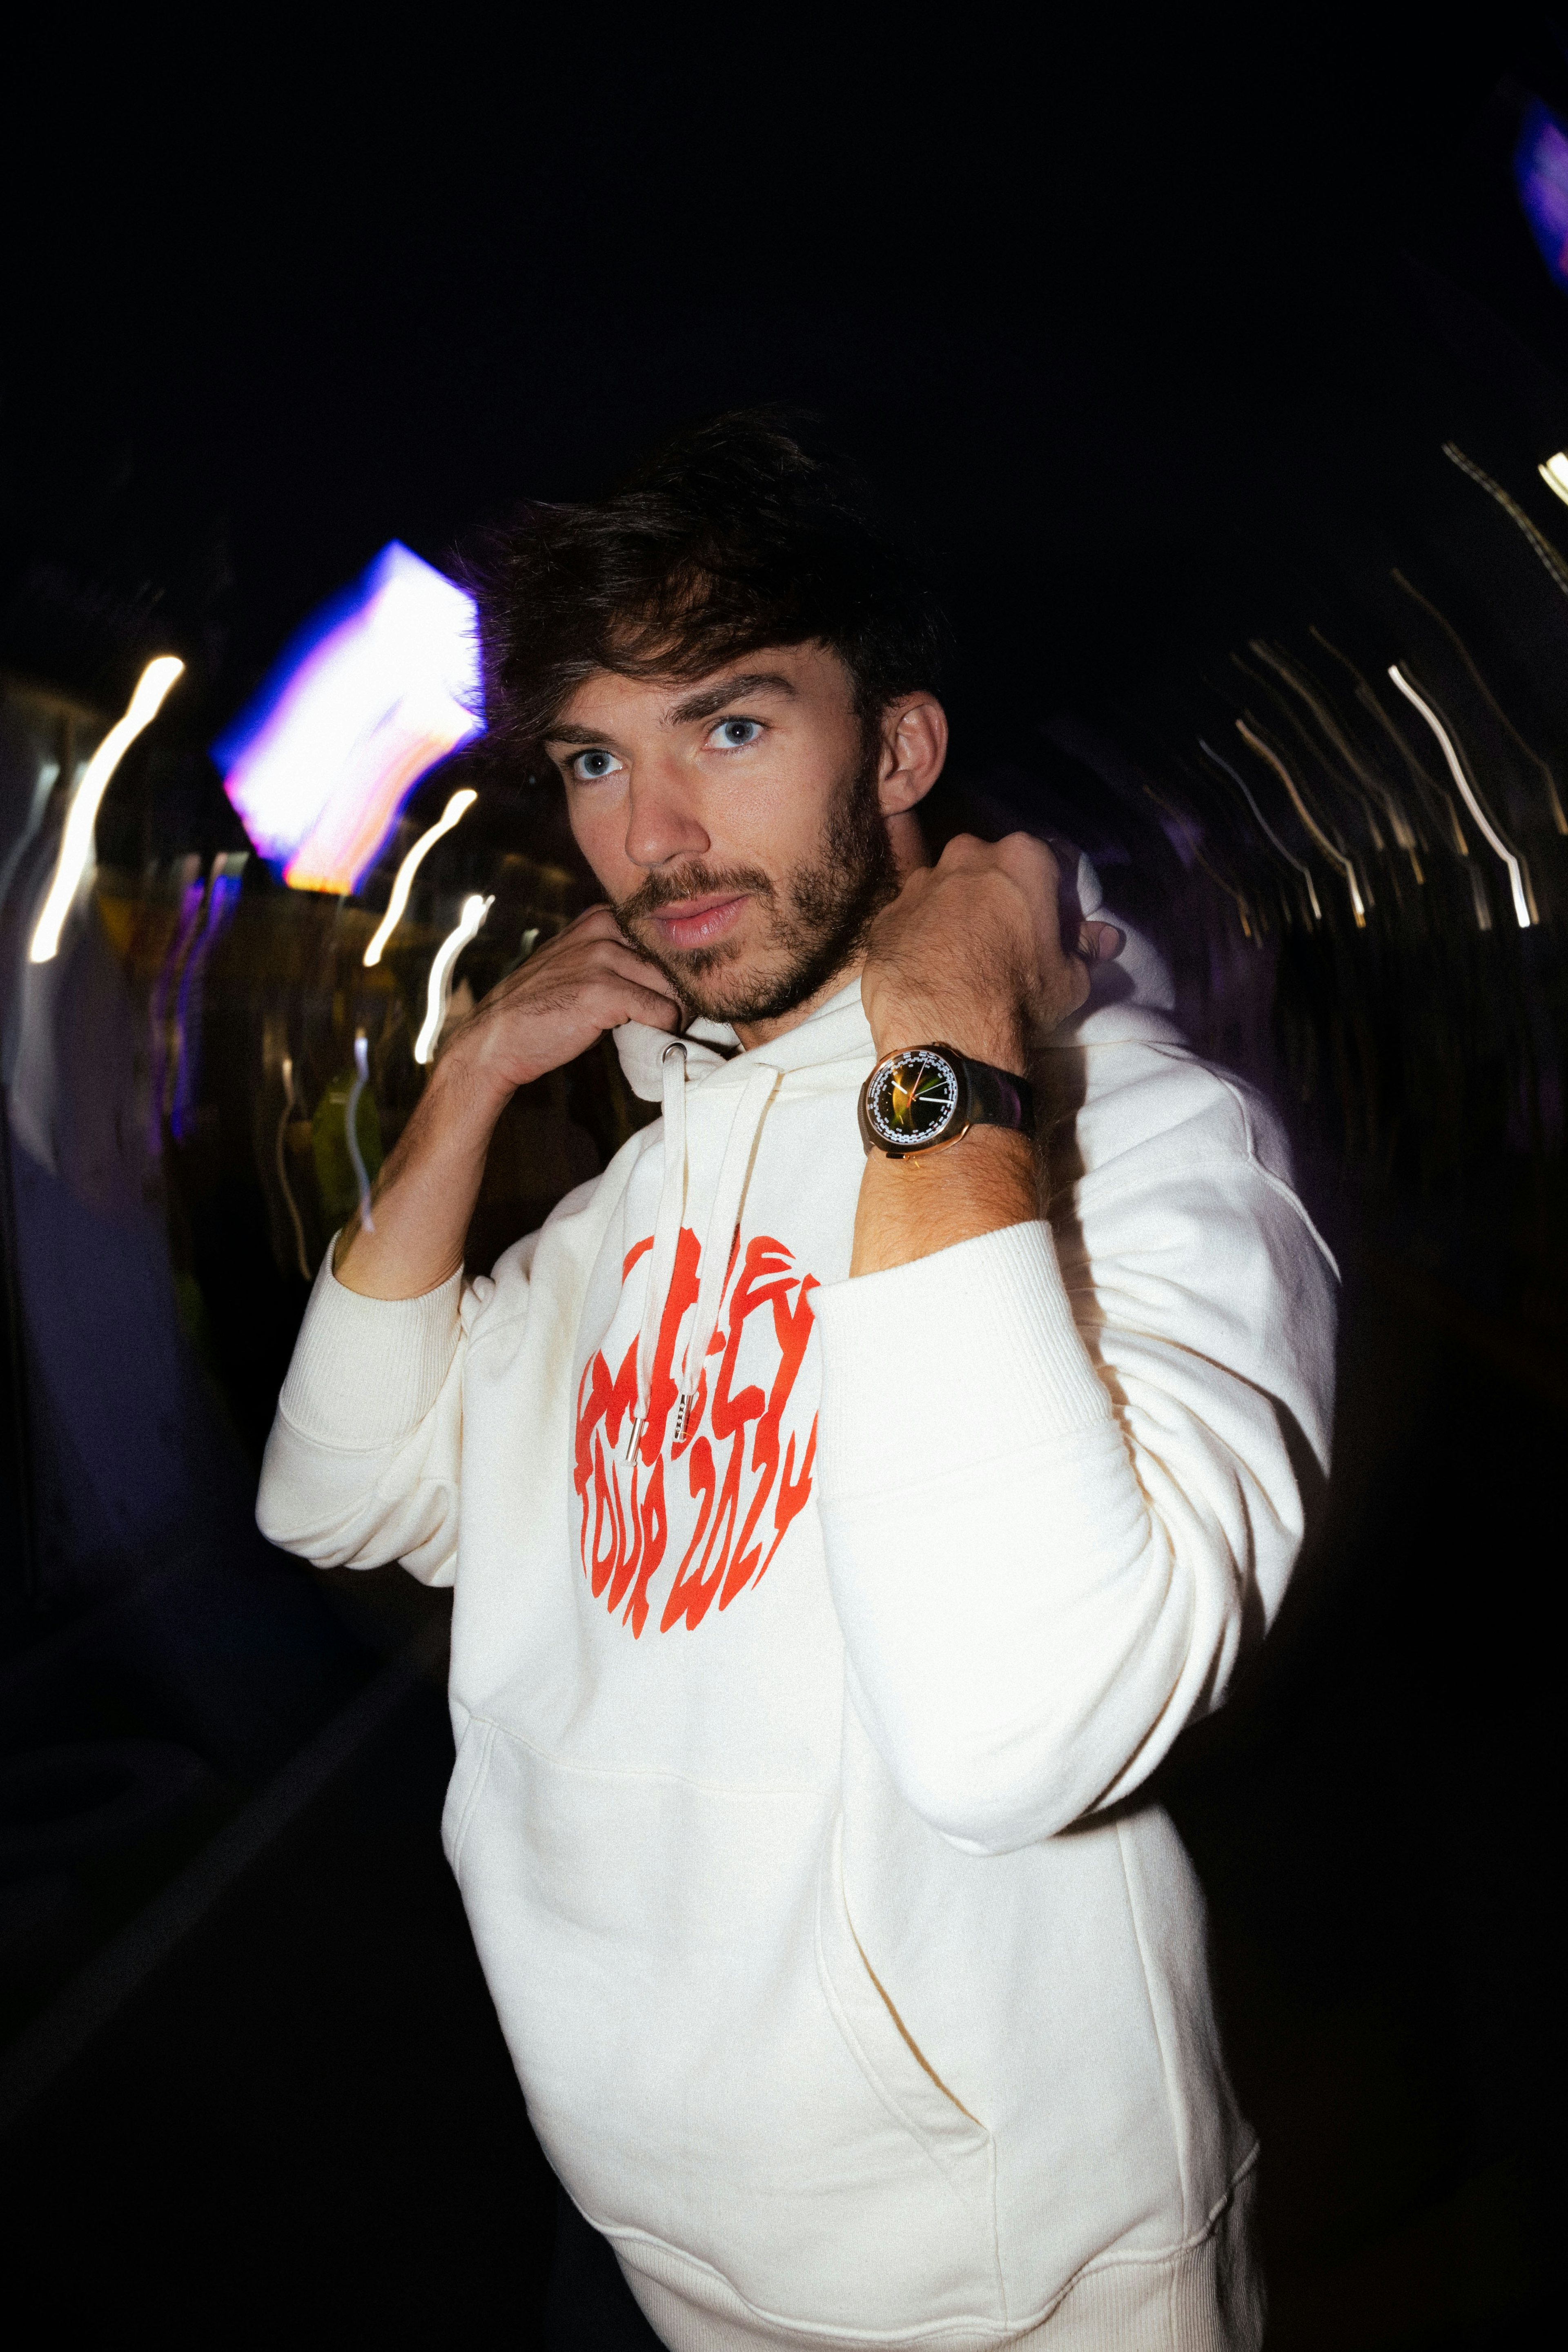 Formula 1 driver Pierre Gasly has partnered with H.Moser & Cie. Photo: H.Moser & Cie